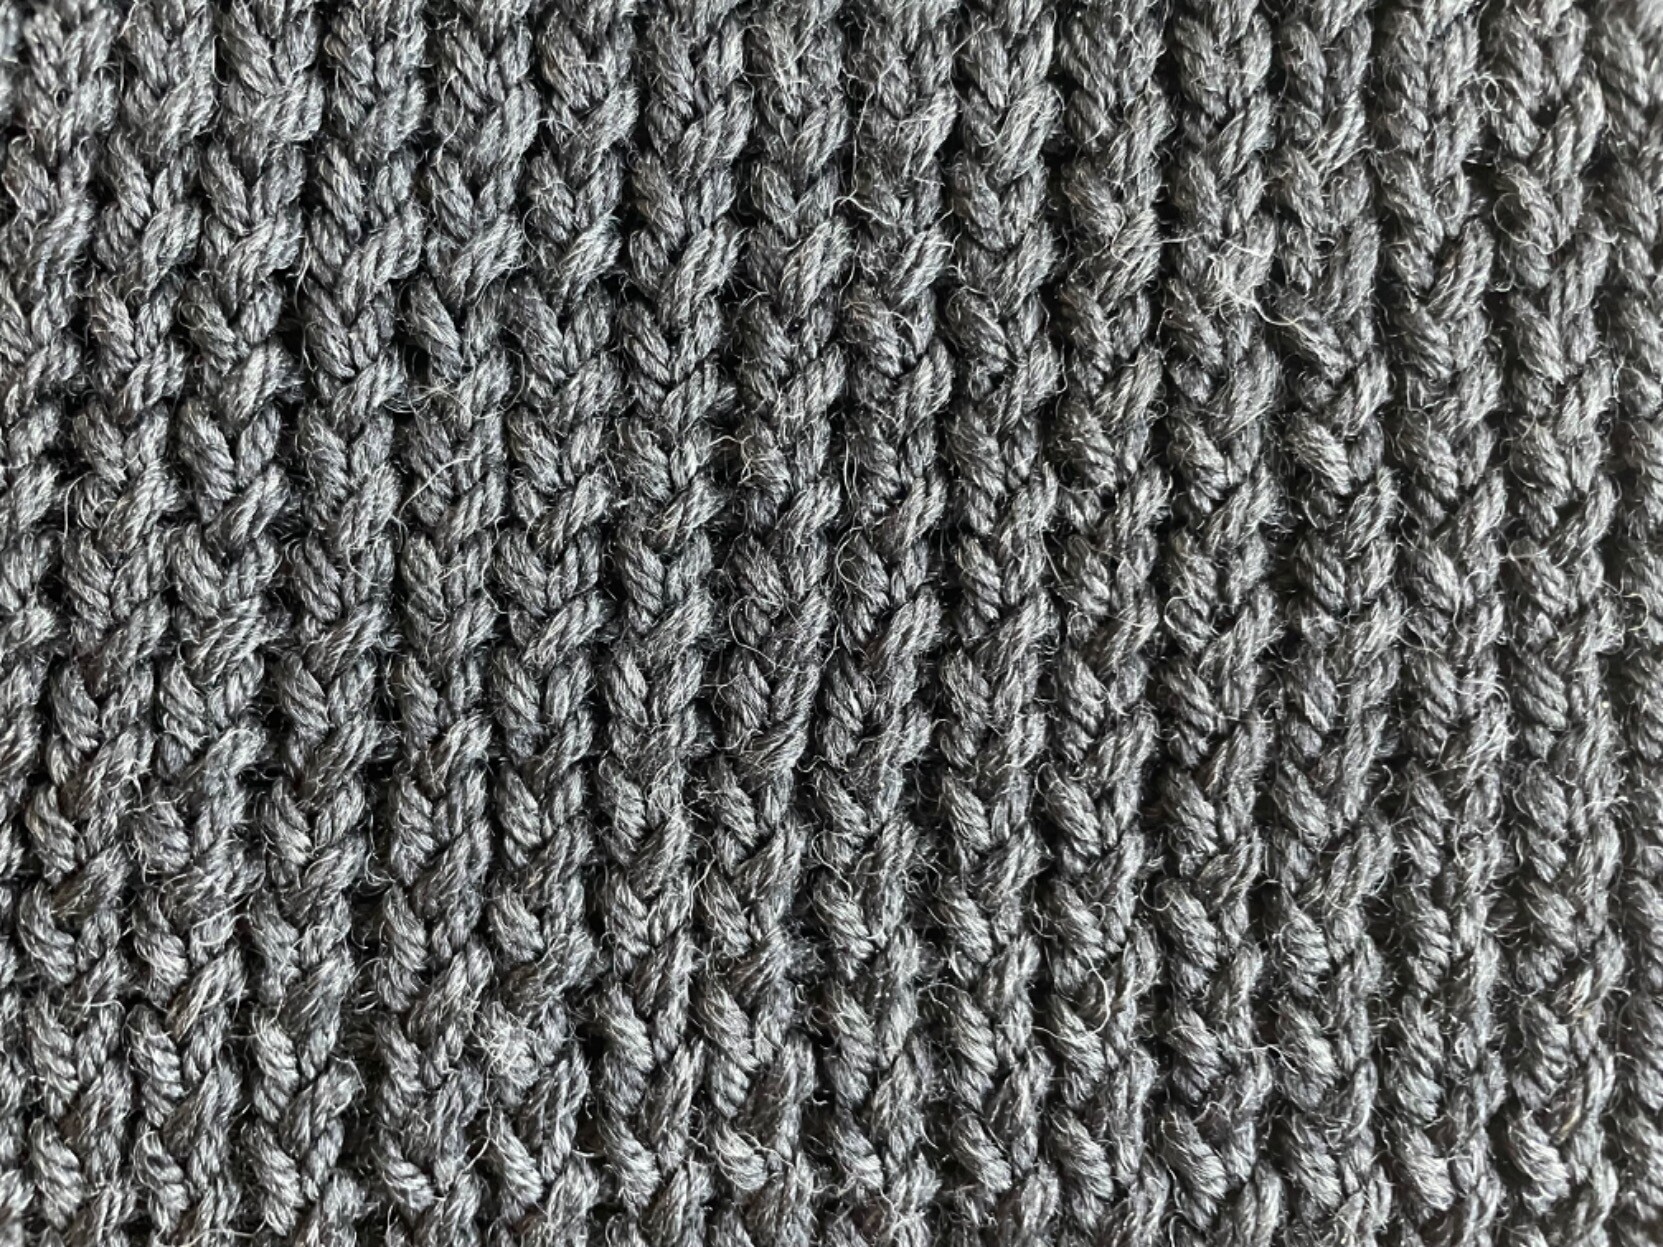 Close up detail of the knit side of fabric in stockinette stitch. The knit stitches are scrunched and twisted.